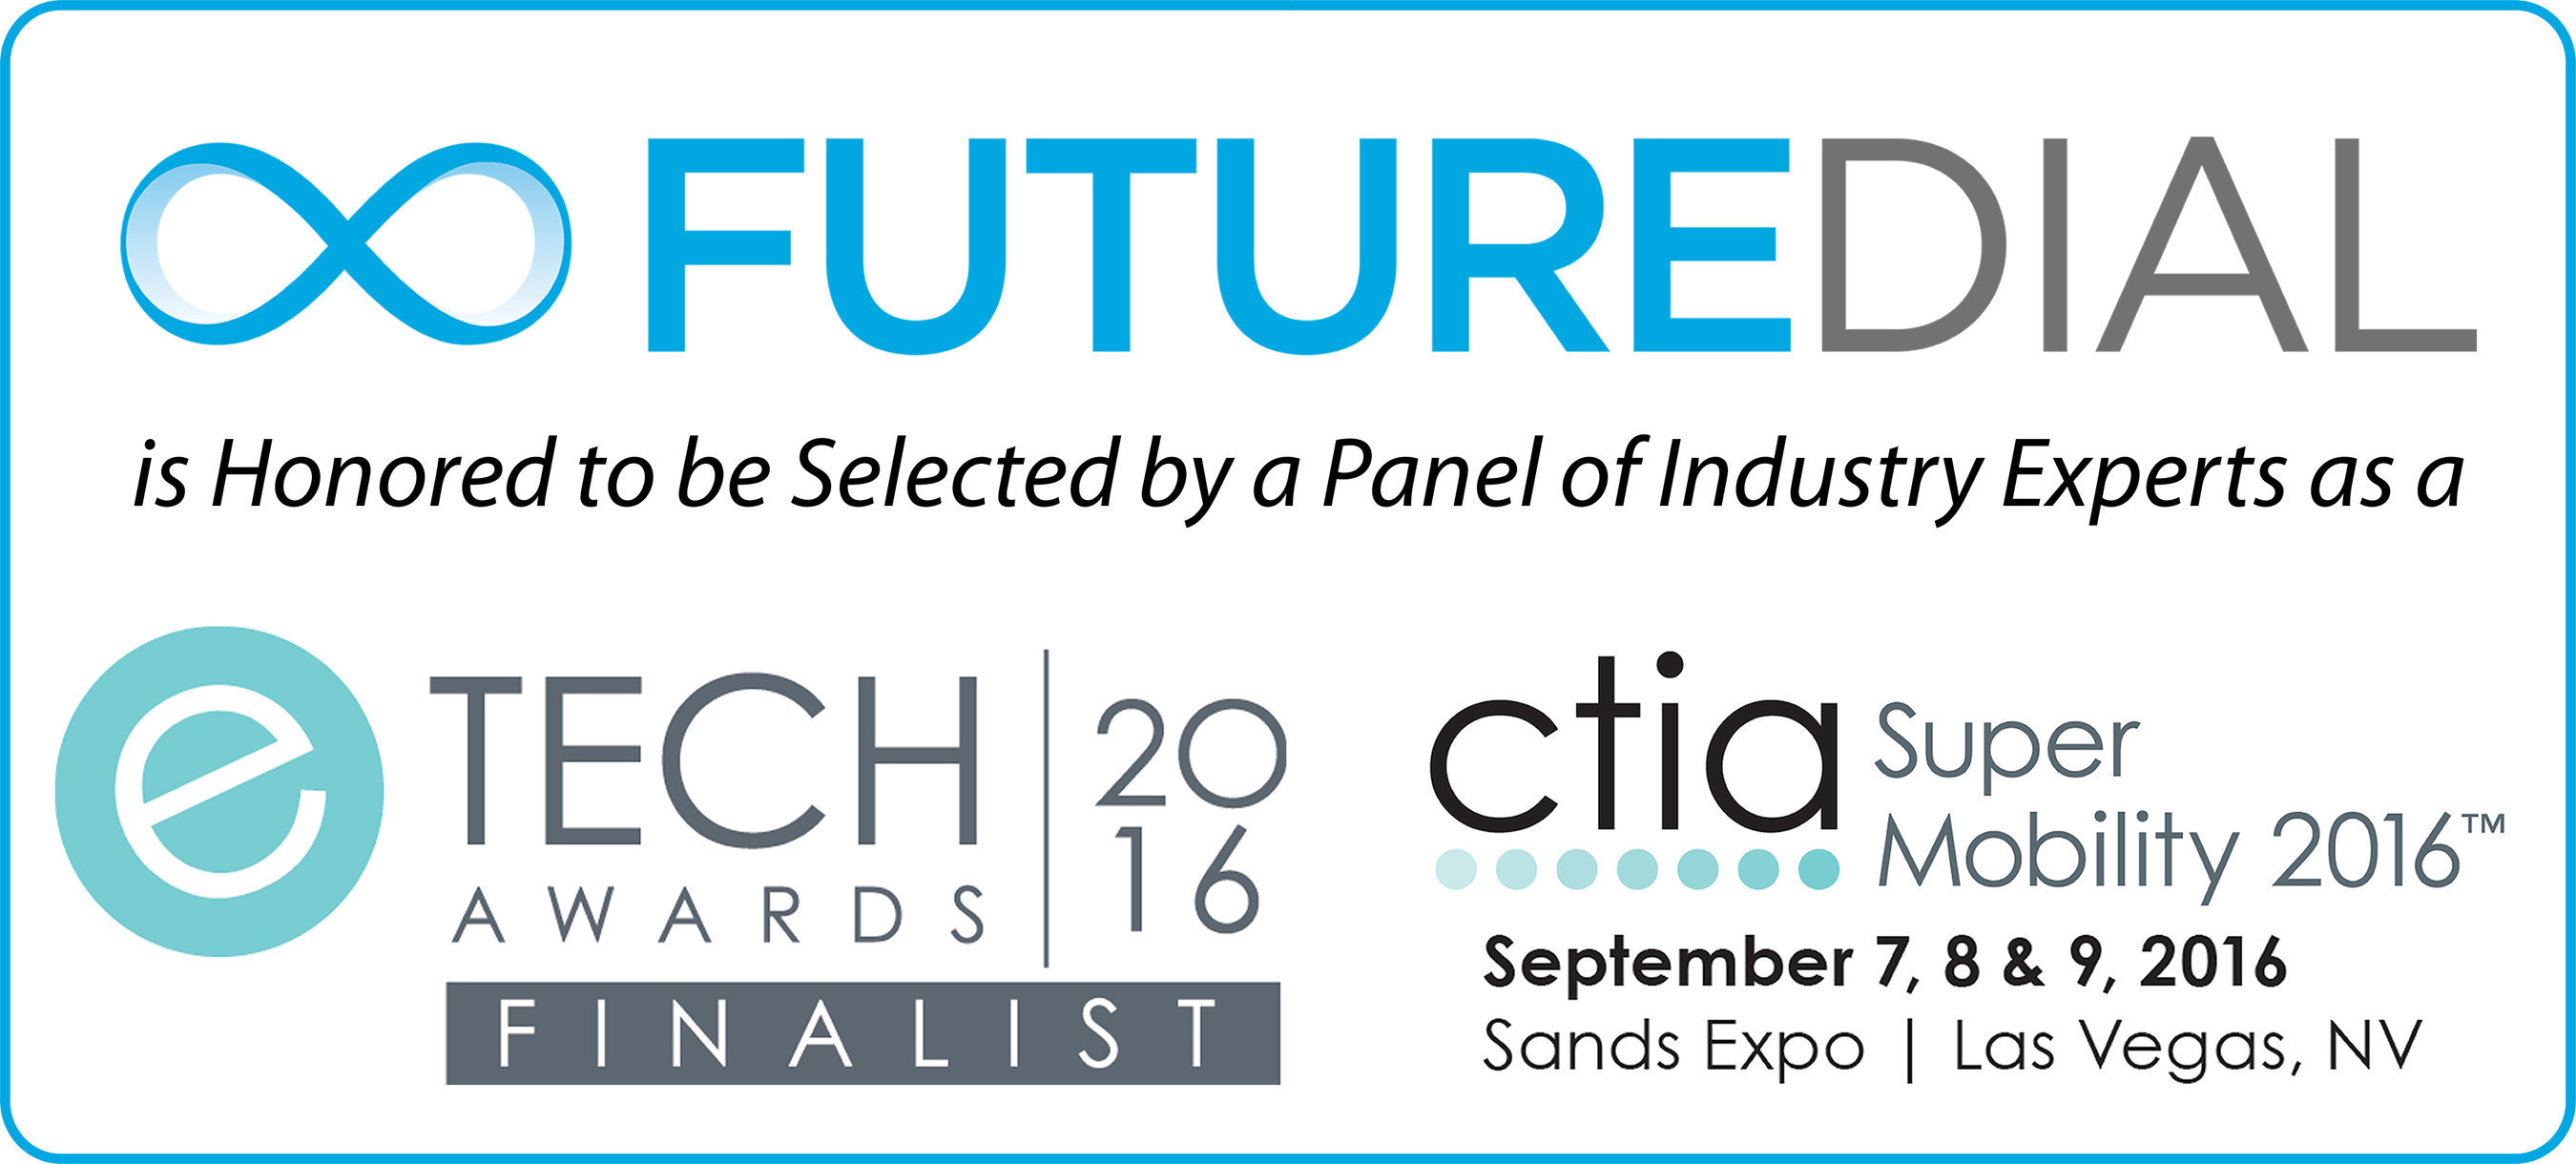 FutureDial's Lean One-Touch(TM) solution has been selected as a finalist in the Everything Industrial & Enterprise category for "Best in Mobility Management Solutions" in the 2016 CTIA eTECH Awards program by a panel of recognized industry experts, media and analysts, who judged hundreds of submissions. Winners will be announced and awarded in a ceremony on the Connected Life and Startup Stage (booth #3715) during CTIA Super Mobility 2016 in Las Vegas on Sept. 8th, 2016 at 2:00pm. FutureDial is excited and honored that its Lean One-Touch product has been recognized by experts as being among the best in the industry.